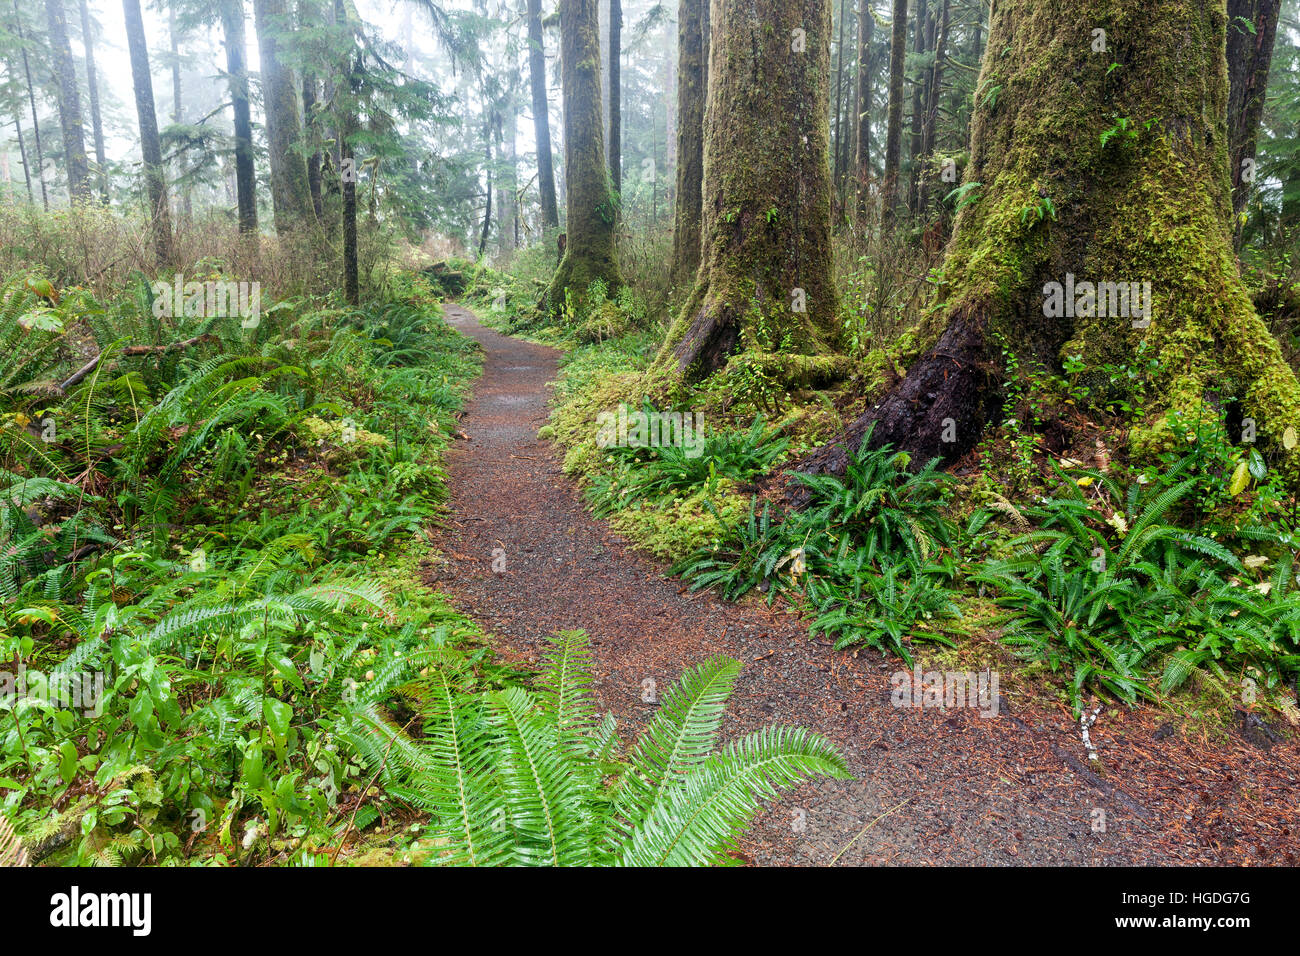 WA11974-00...WASHINGTON - Gatton Creek Trail nel Quinault National Recreation Trail System, Olympic National Forest. Foto Stock